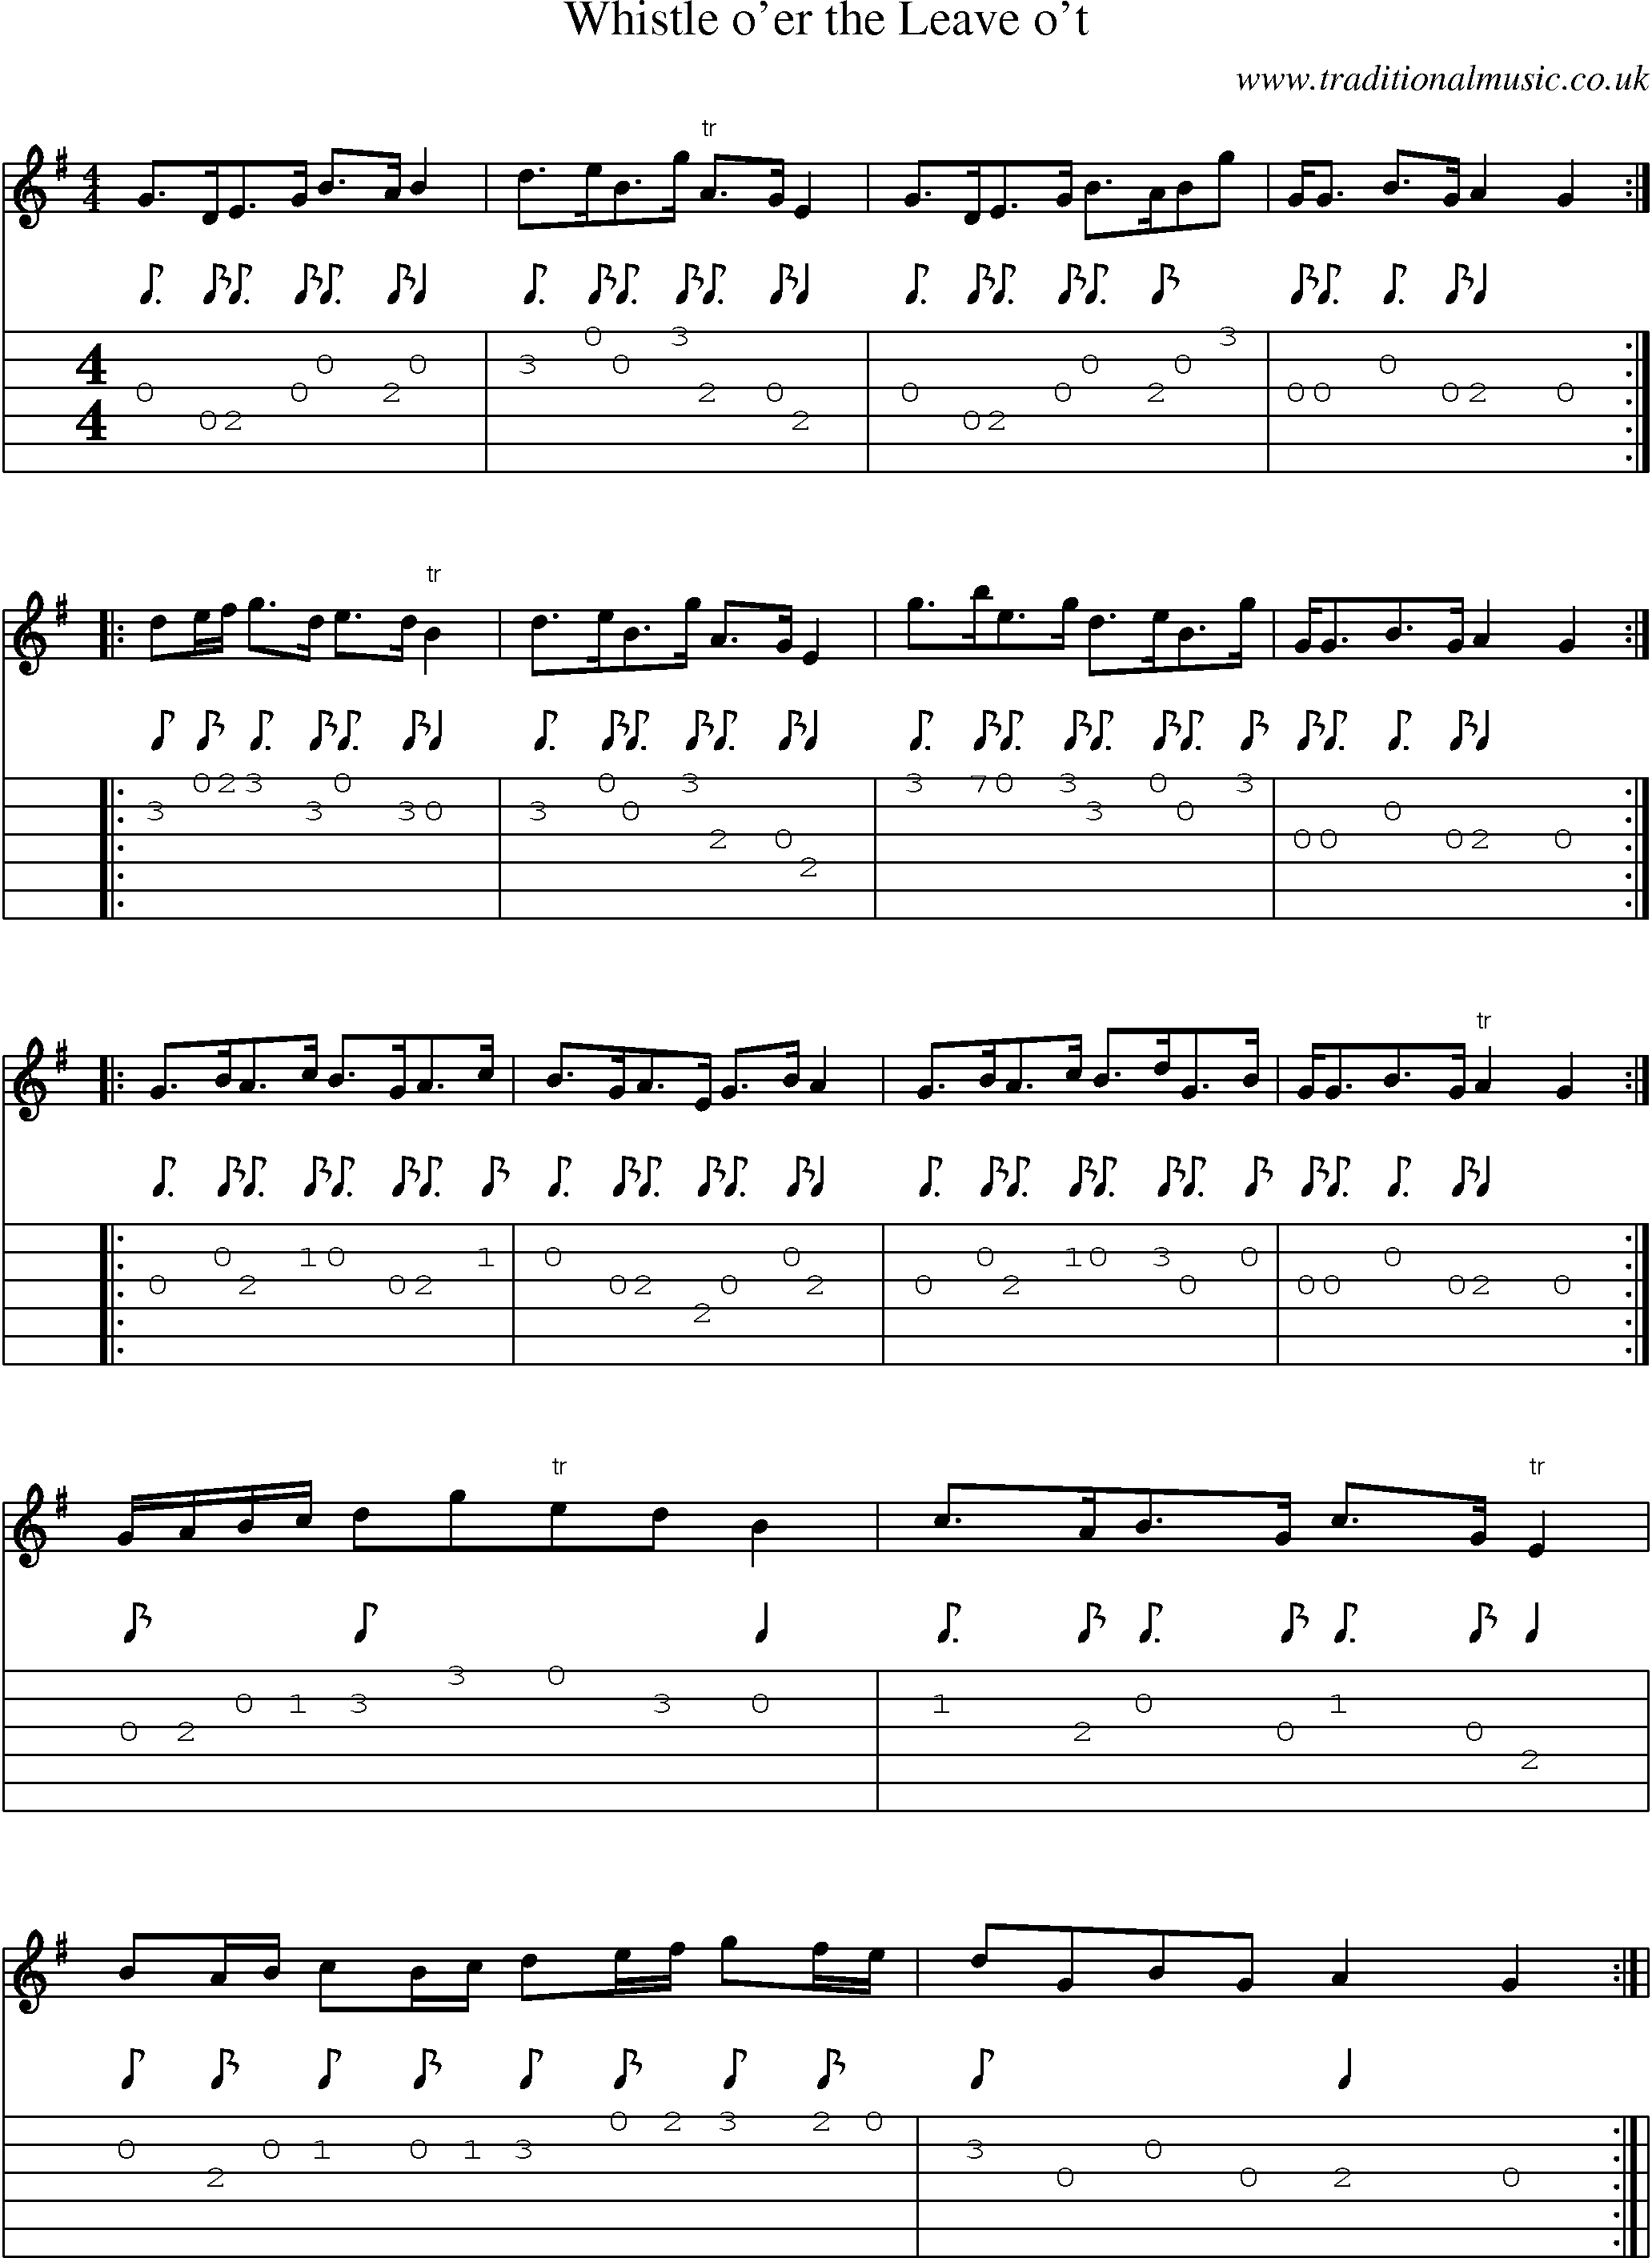 Music Score and Guitar Tabs for Whistle Oer Leave Ot